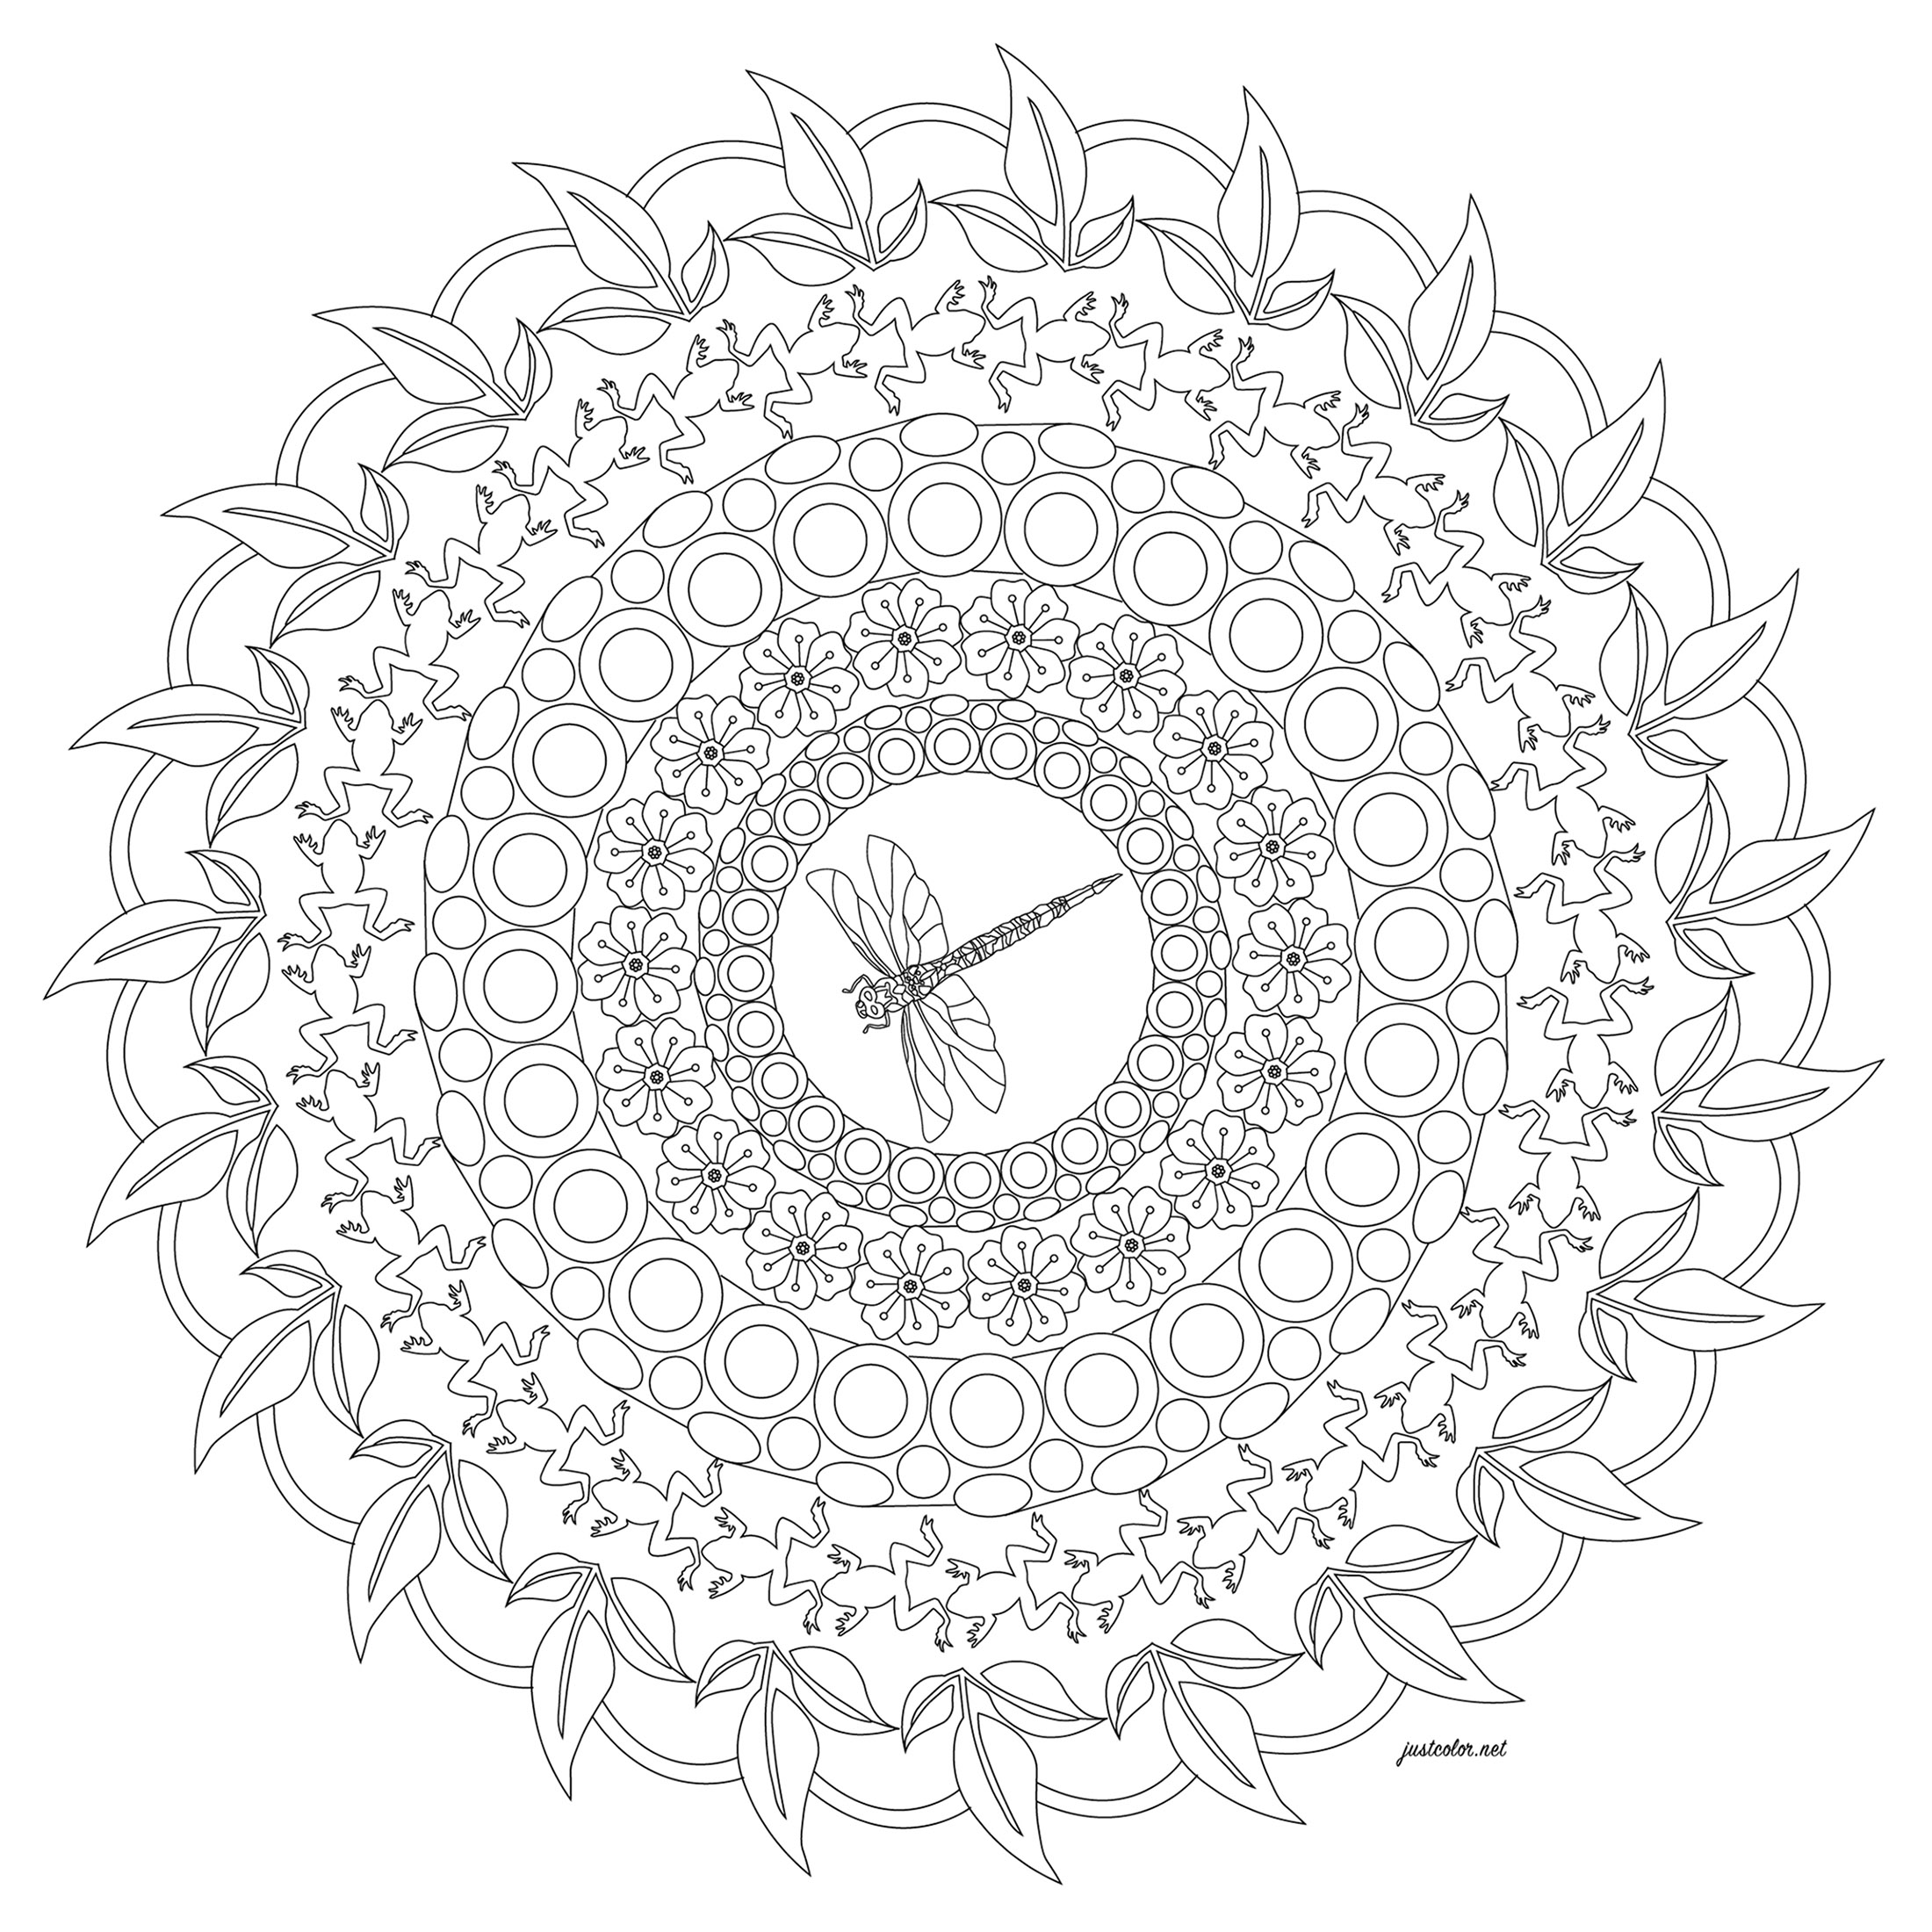 Color this Mandala with a dragonfly in the center. Do you see the frogs ?